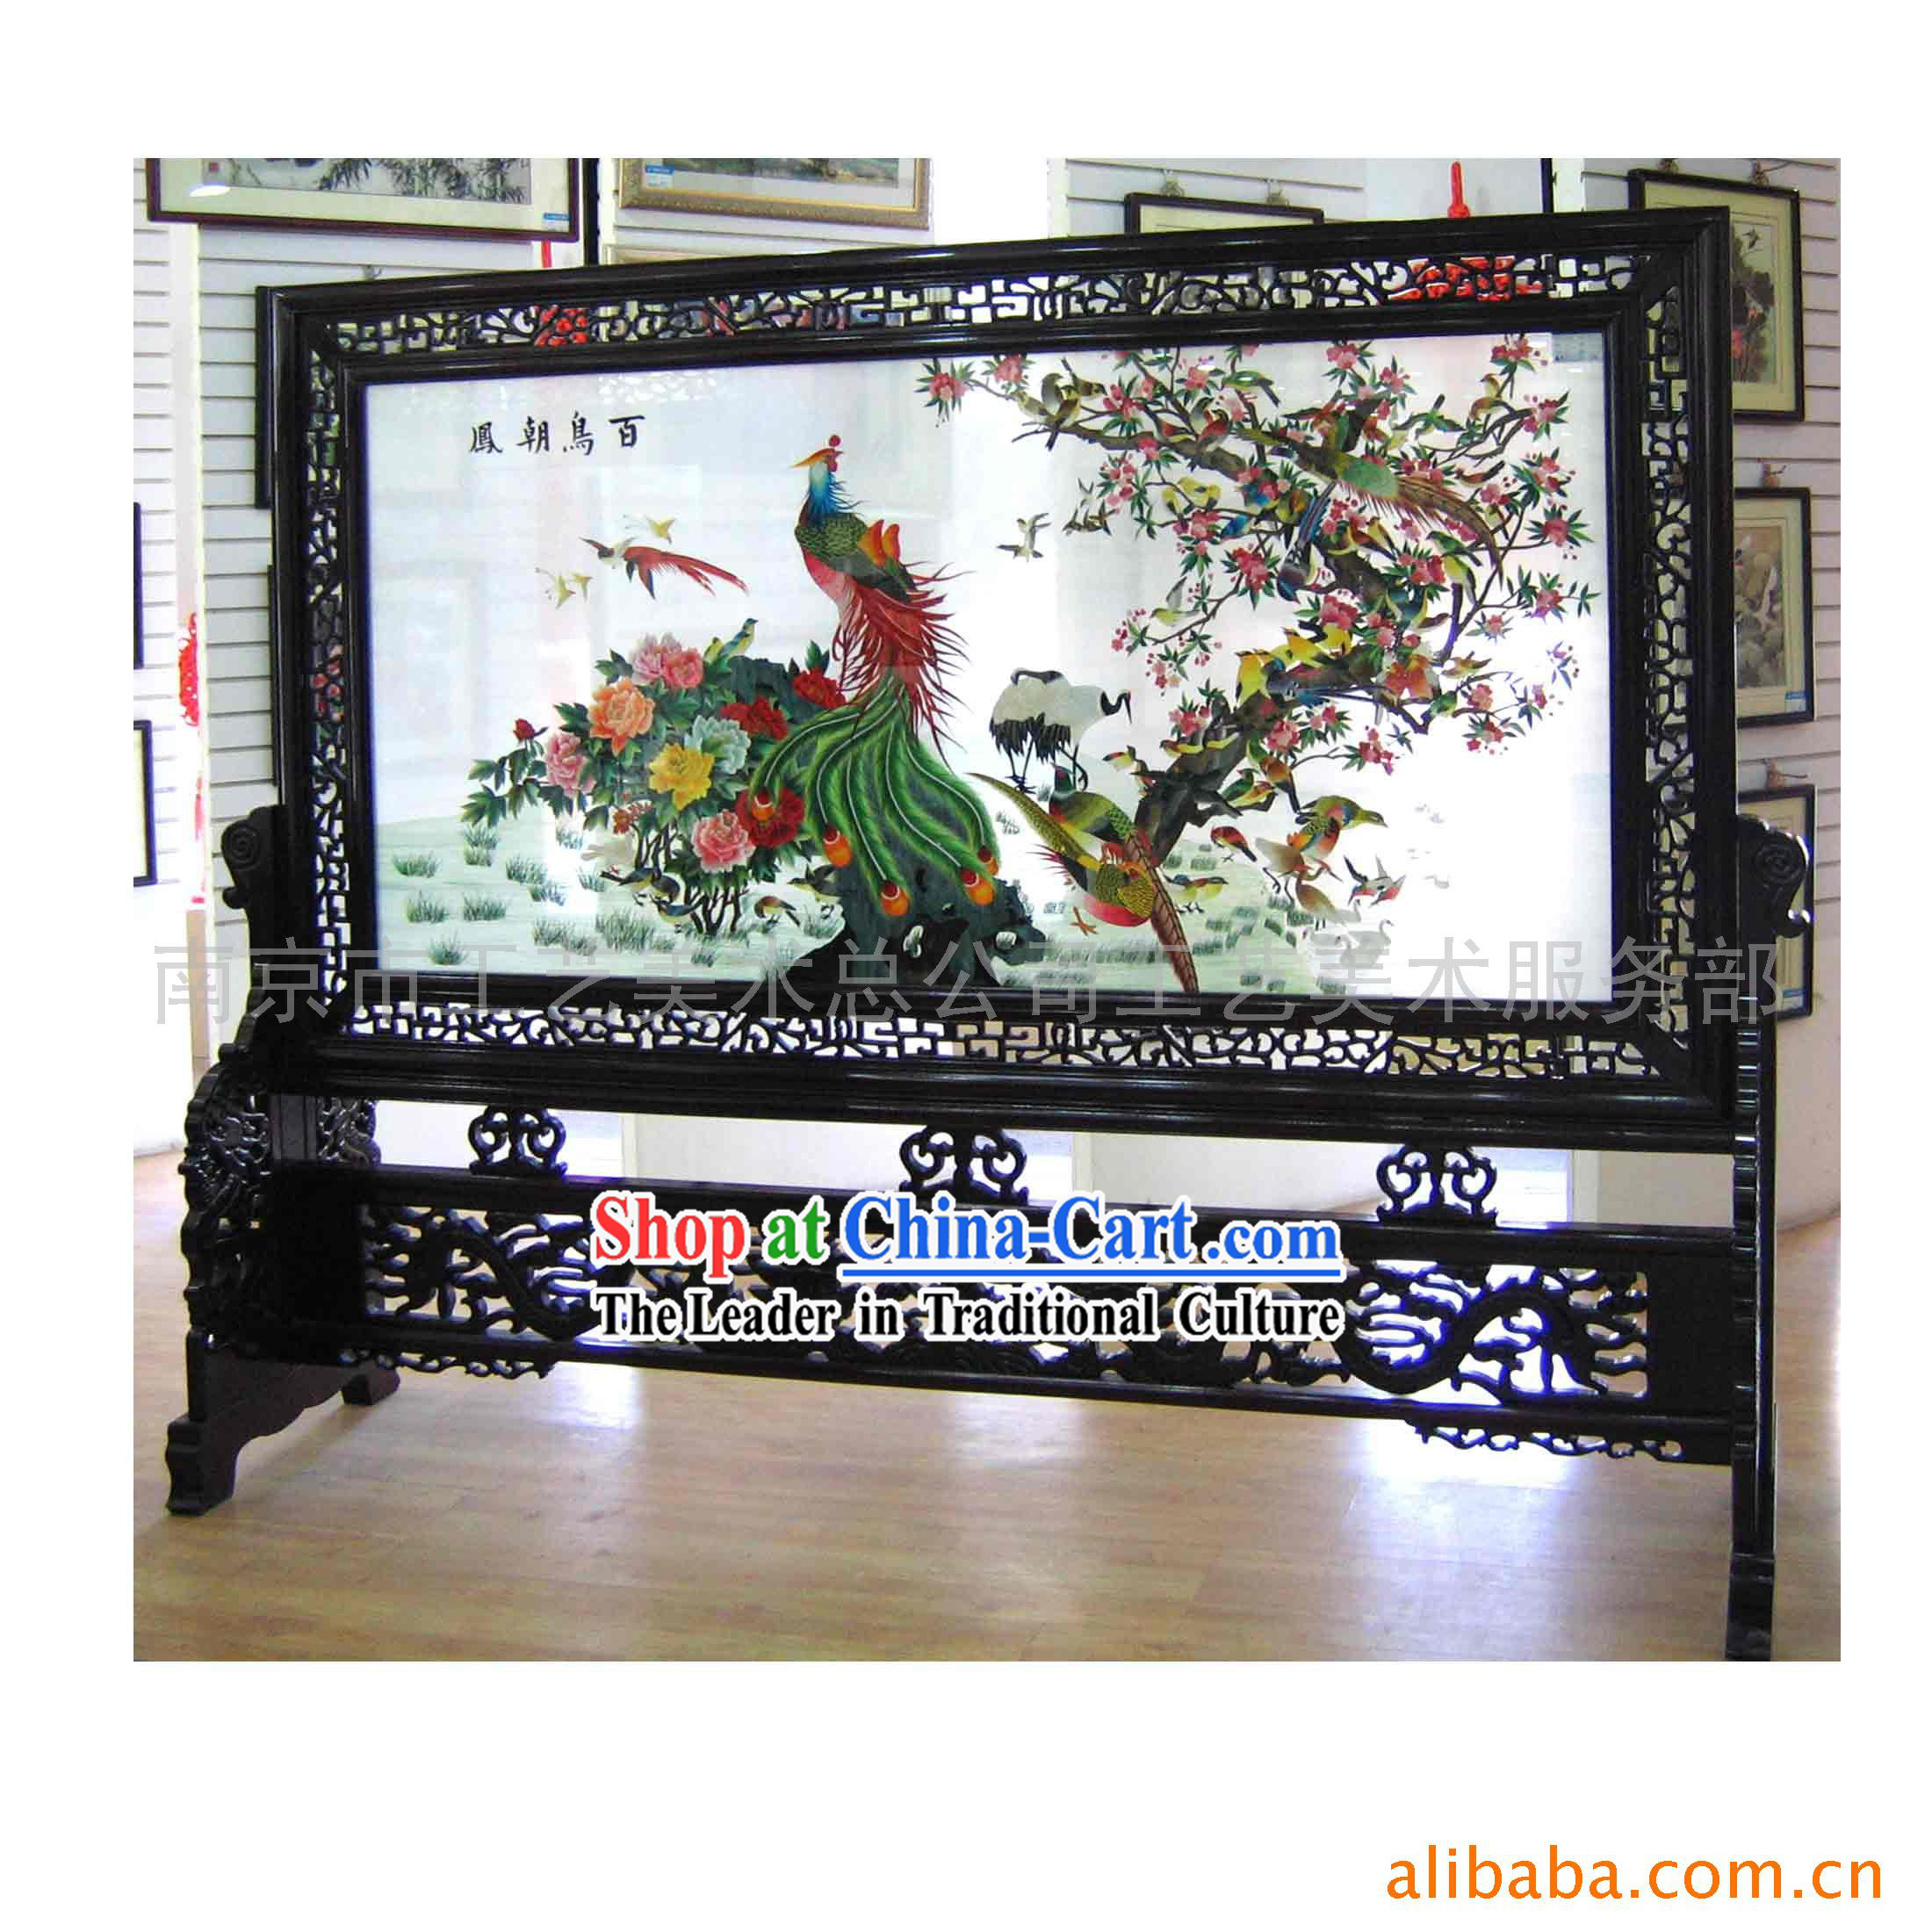 Chinese Double Side Hand Made Embroidery Works-Hundreds of Birds